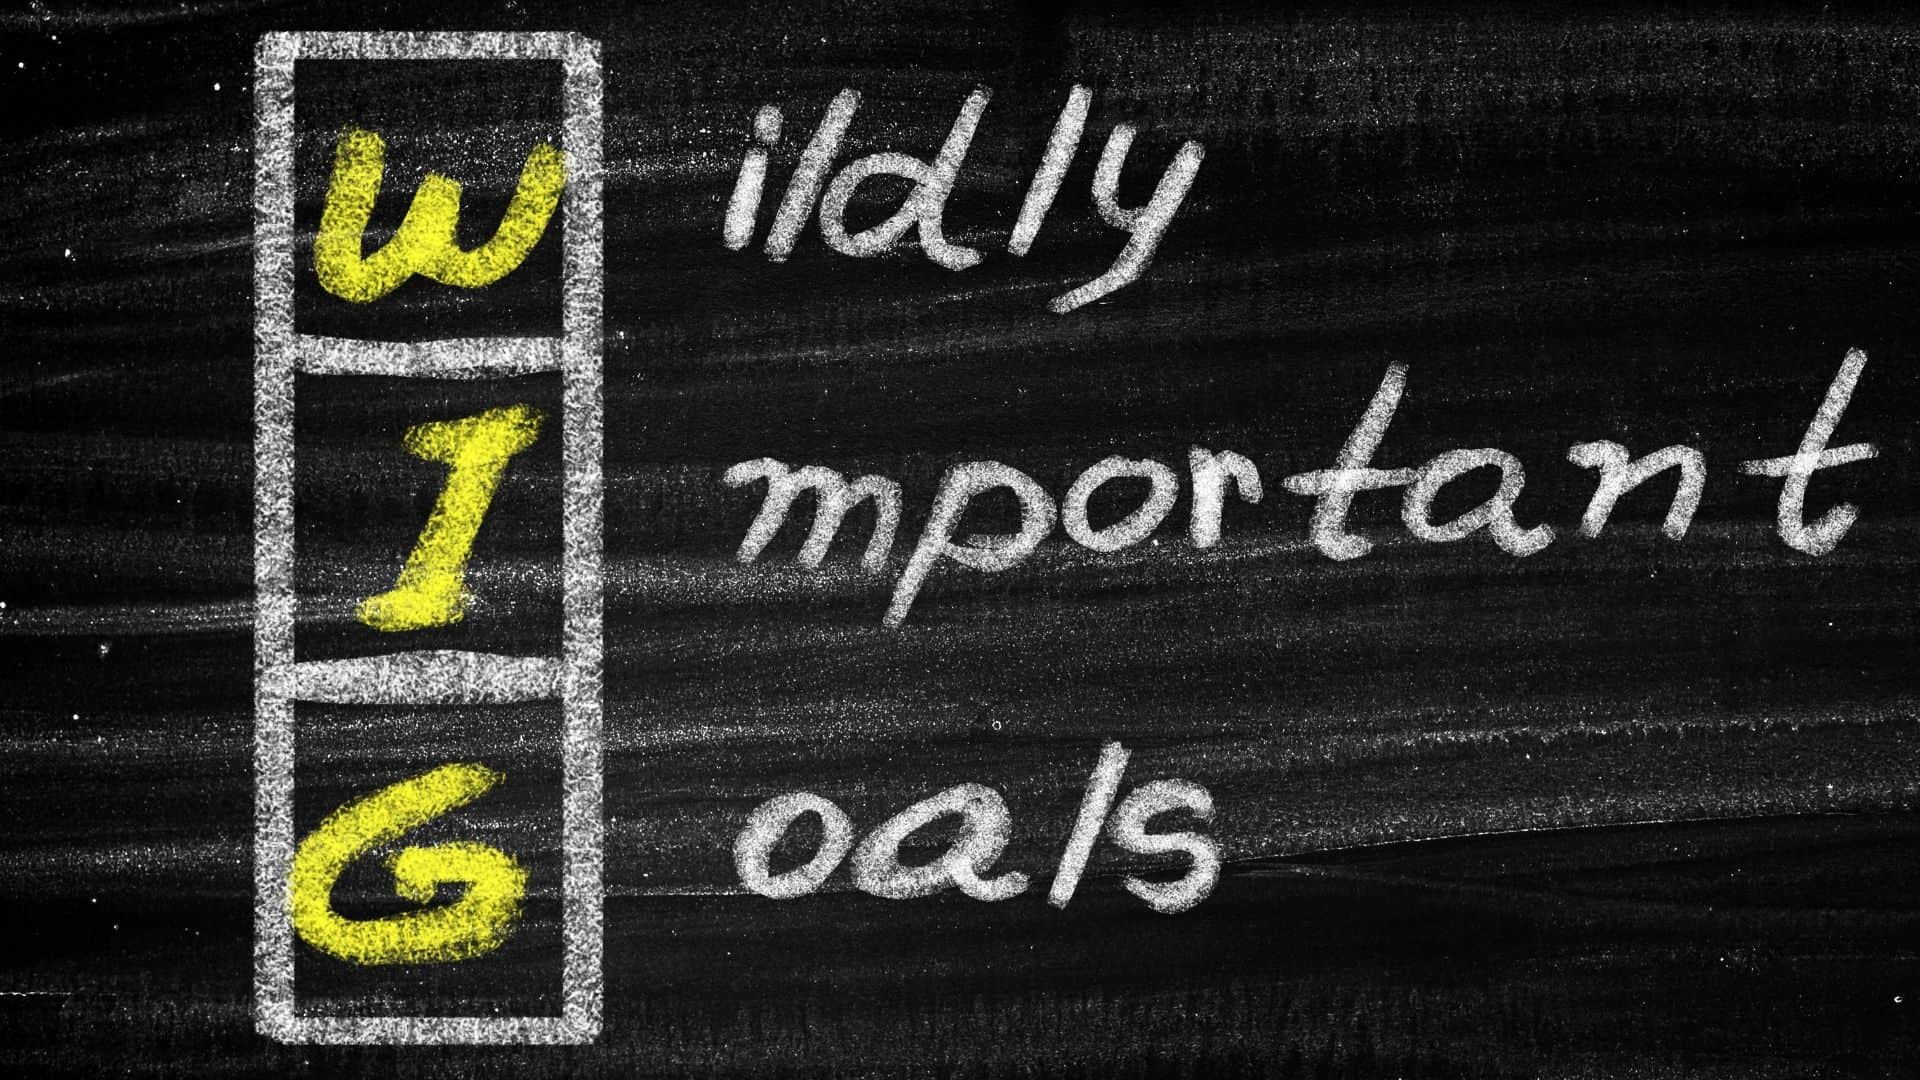 image showing the text "wildly important goals" on a chalkboard-like background